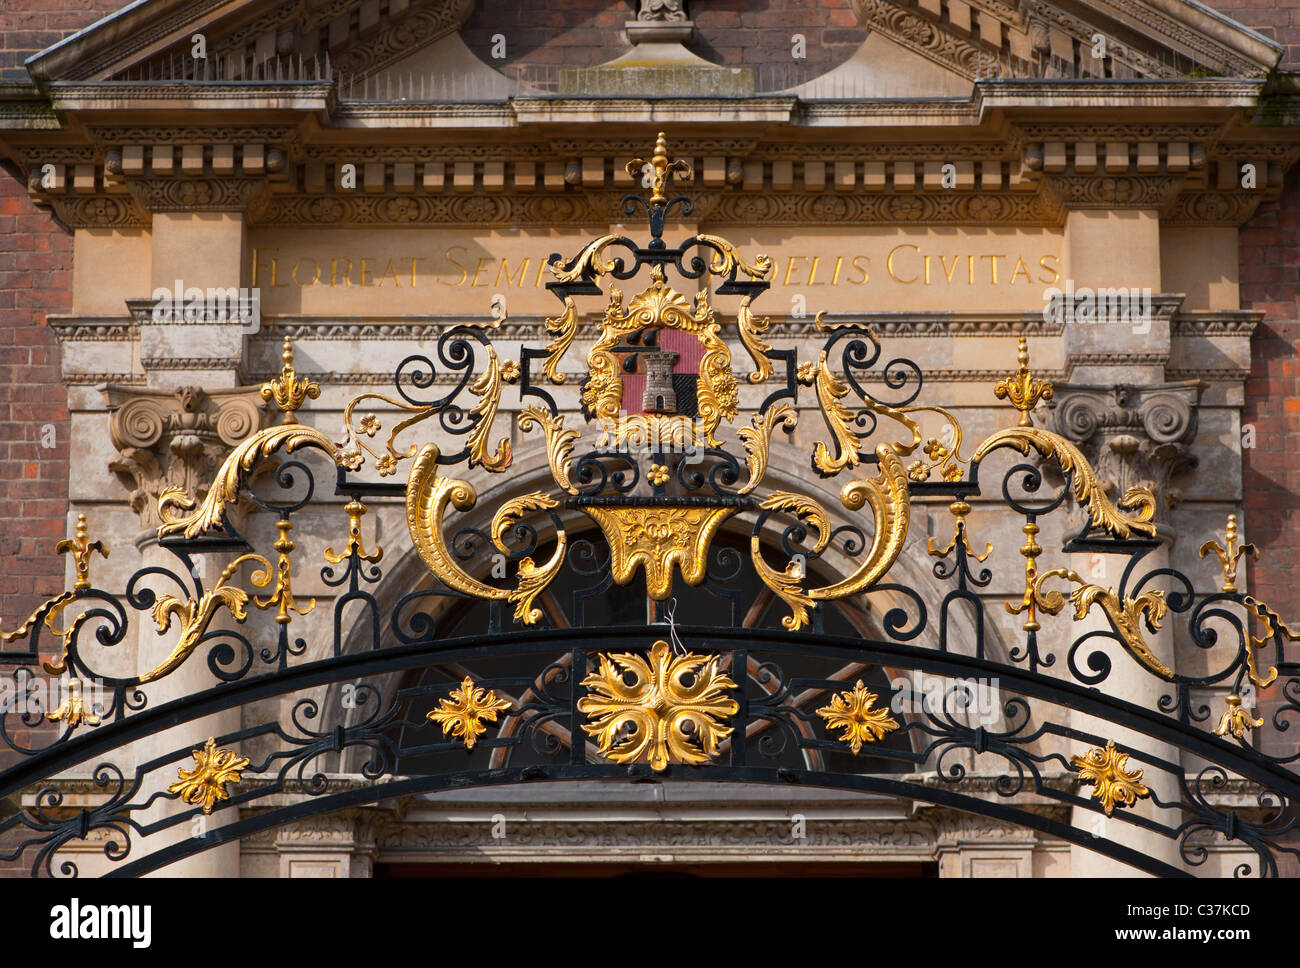 Coat of arms over the gate of Worcester Guildhall Stock Photo